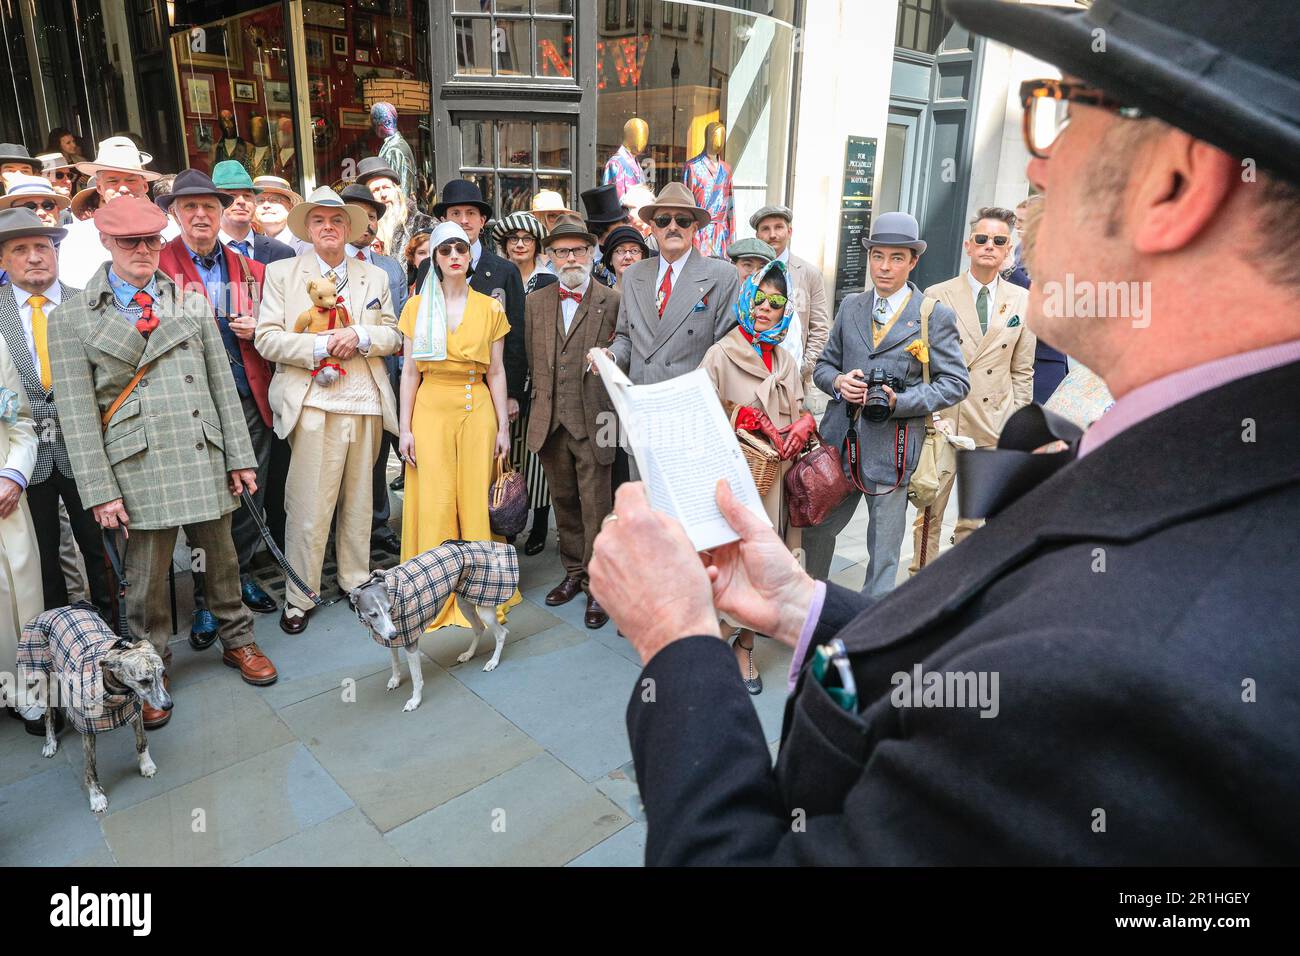 London, UK. 14th May, 2023. Alexander Larman, The Chap Magazine's Literary Editor, reads out to the assembled flaneurs. The annual Grand Flaneur Walk sees chaps and chapettes, dandies and quaintrelle in impeccable tailoring and style flanning and sauntering without purpose around St James' and surrounding areas of London. The walk always starts at the statue of socialite dandy Beau Brummell and slowly makes its way around the area. Credit: Imageplotter/Alamy Live News Stock Photo